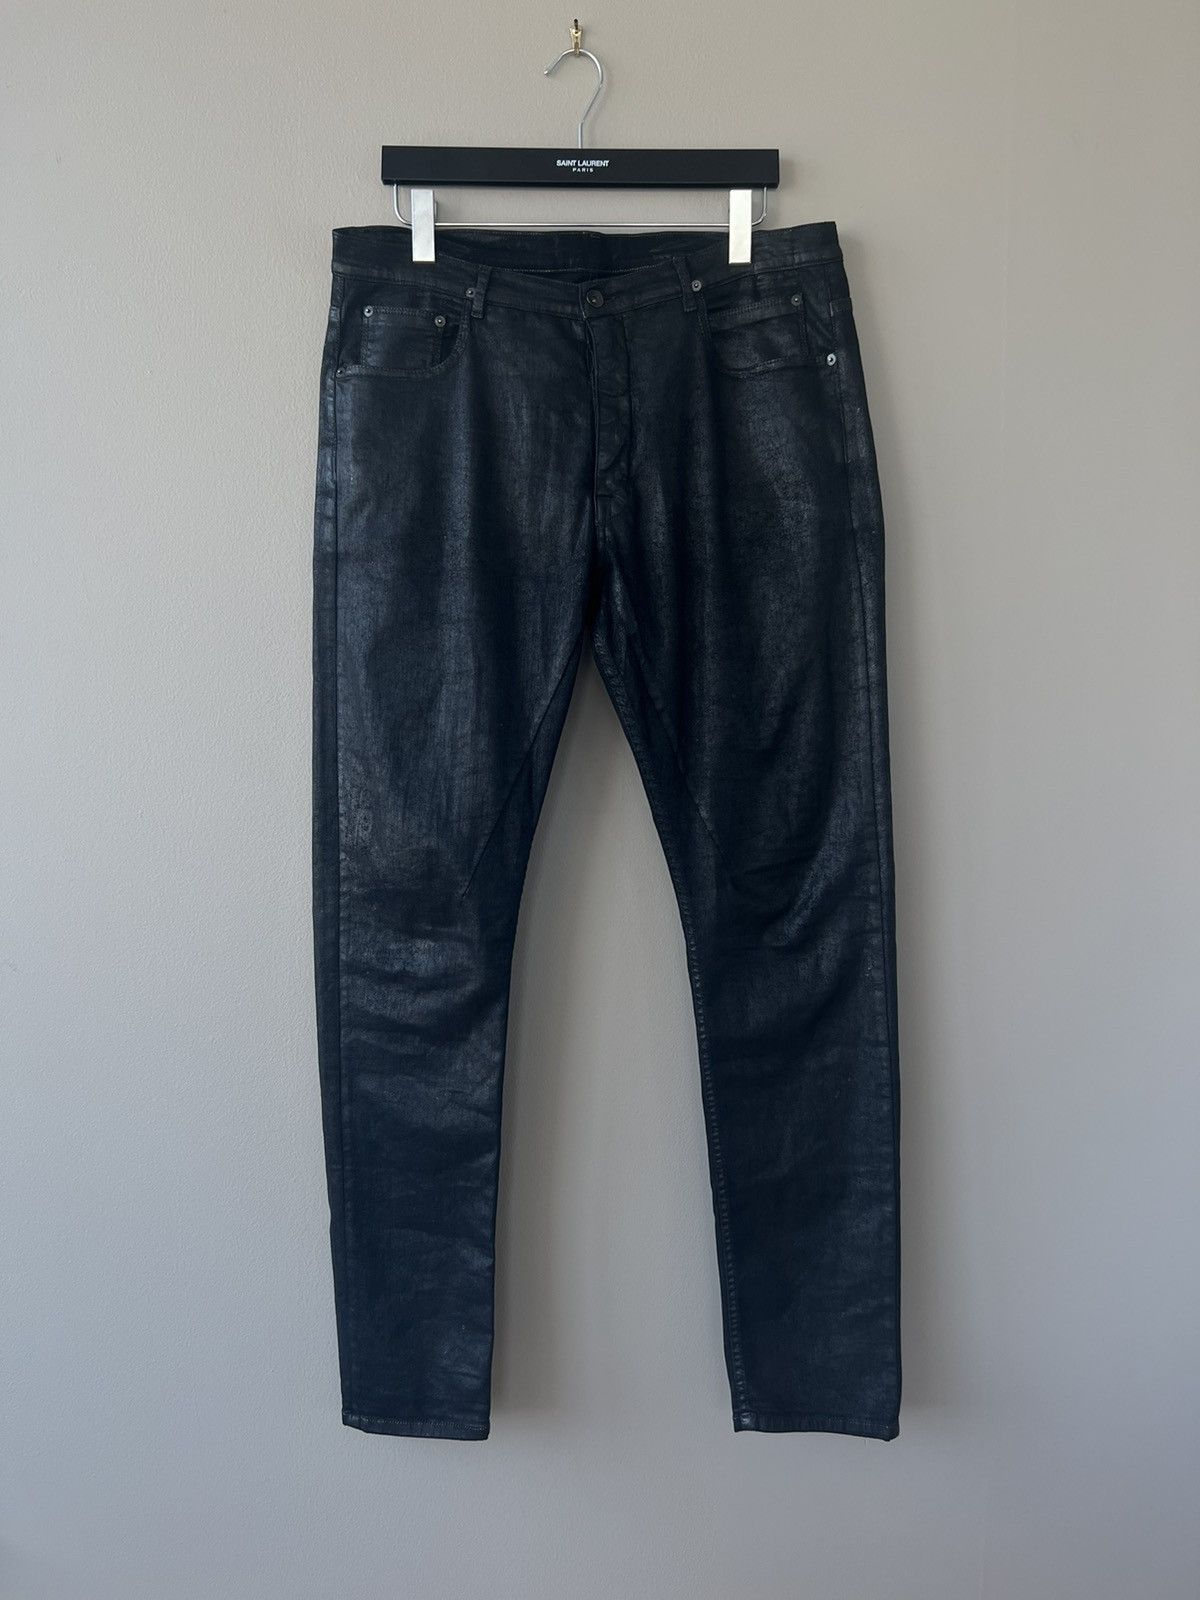 Black Waxed Torrence Cut Jeans - 1